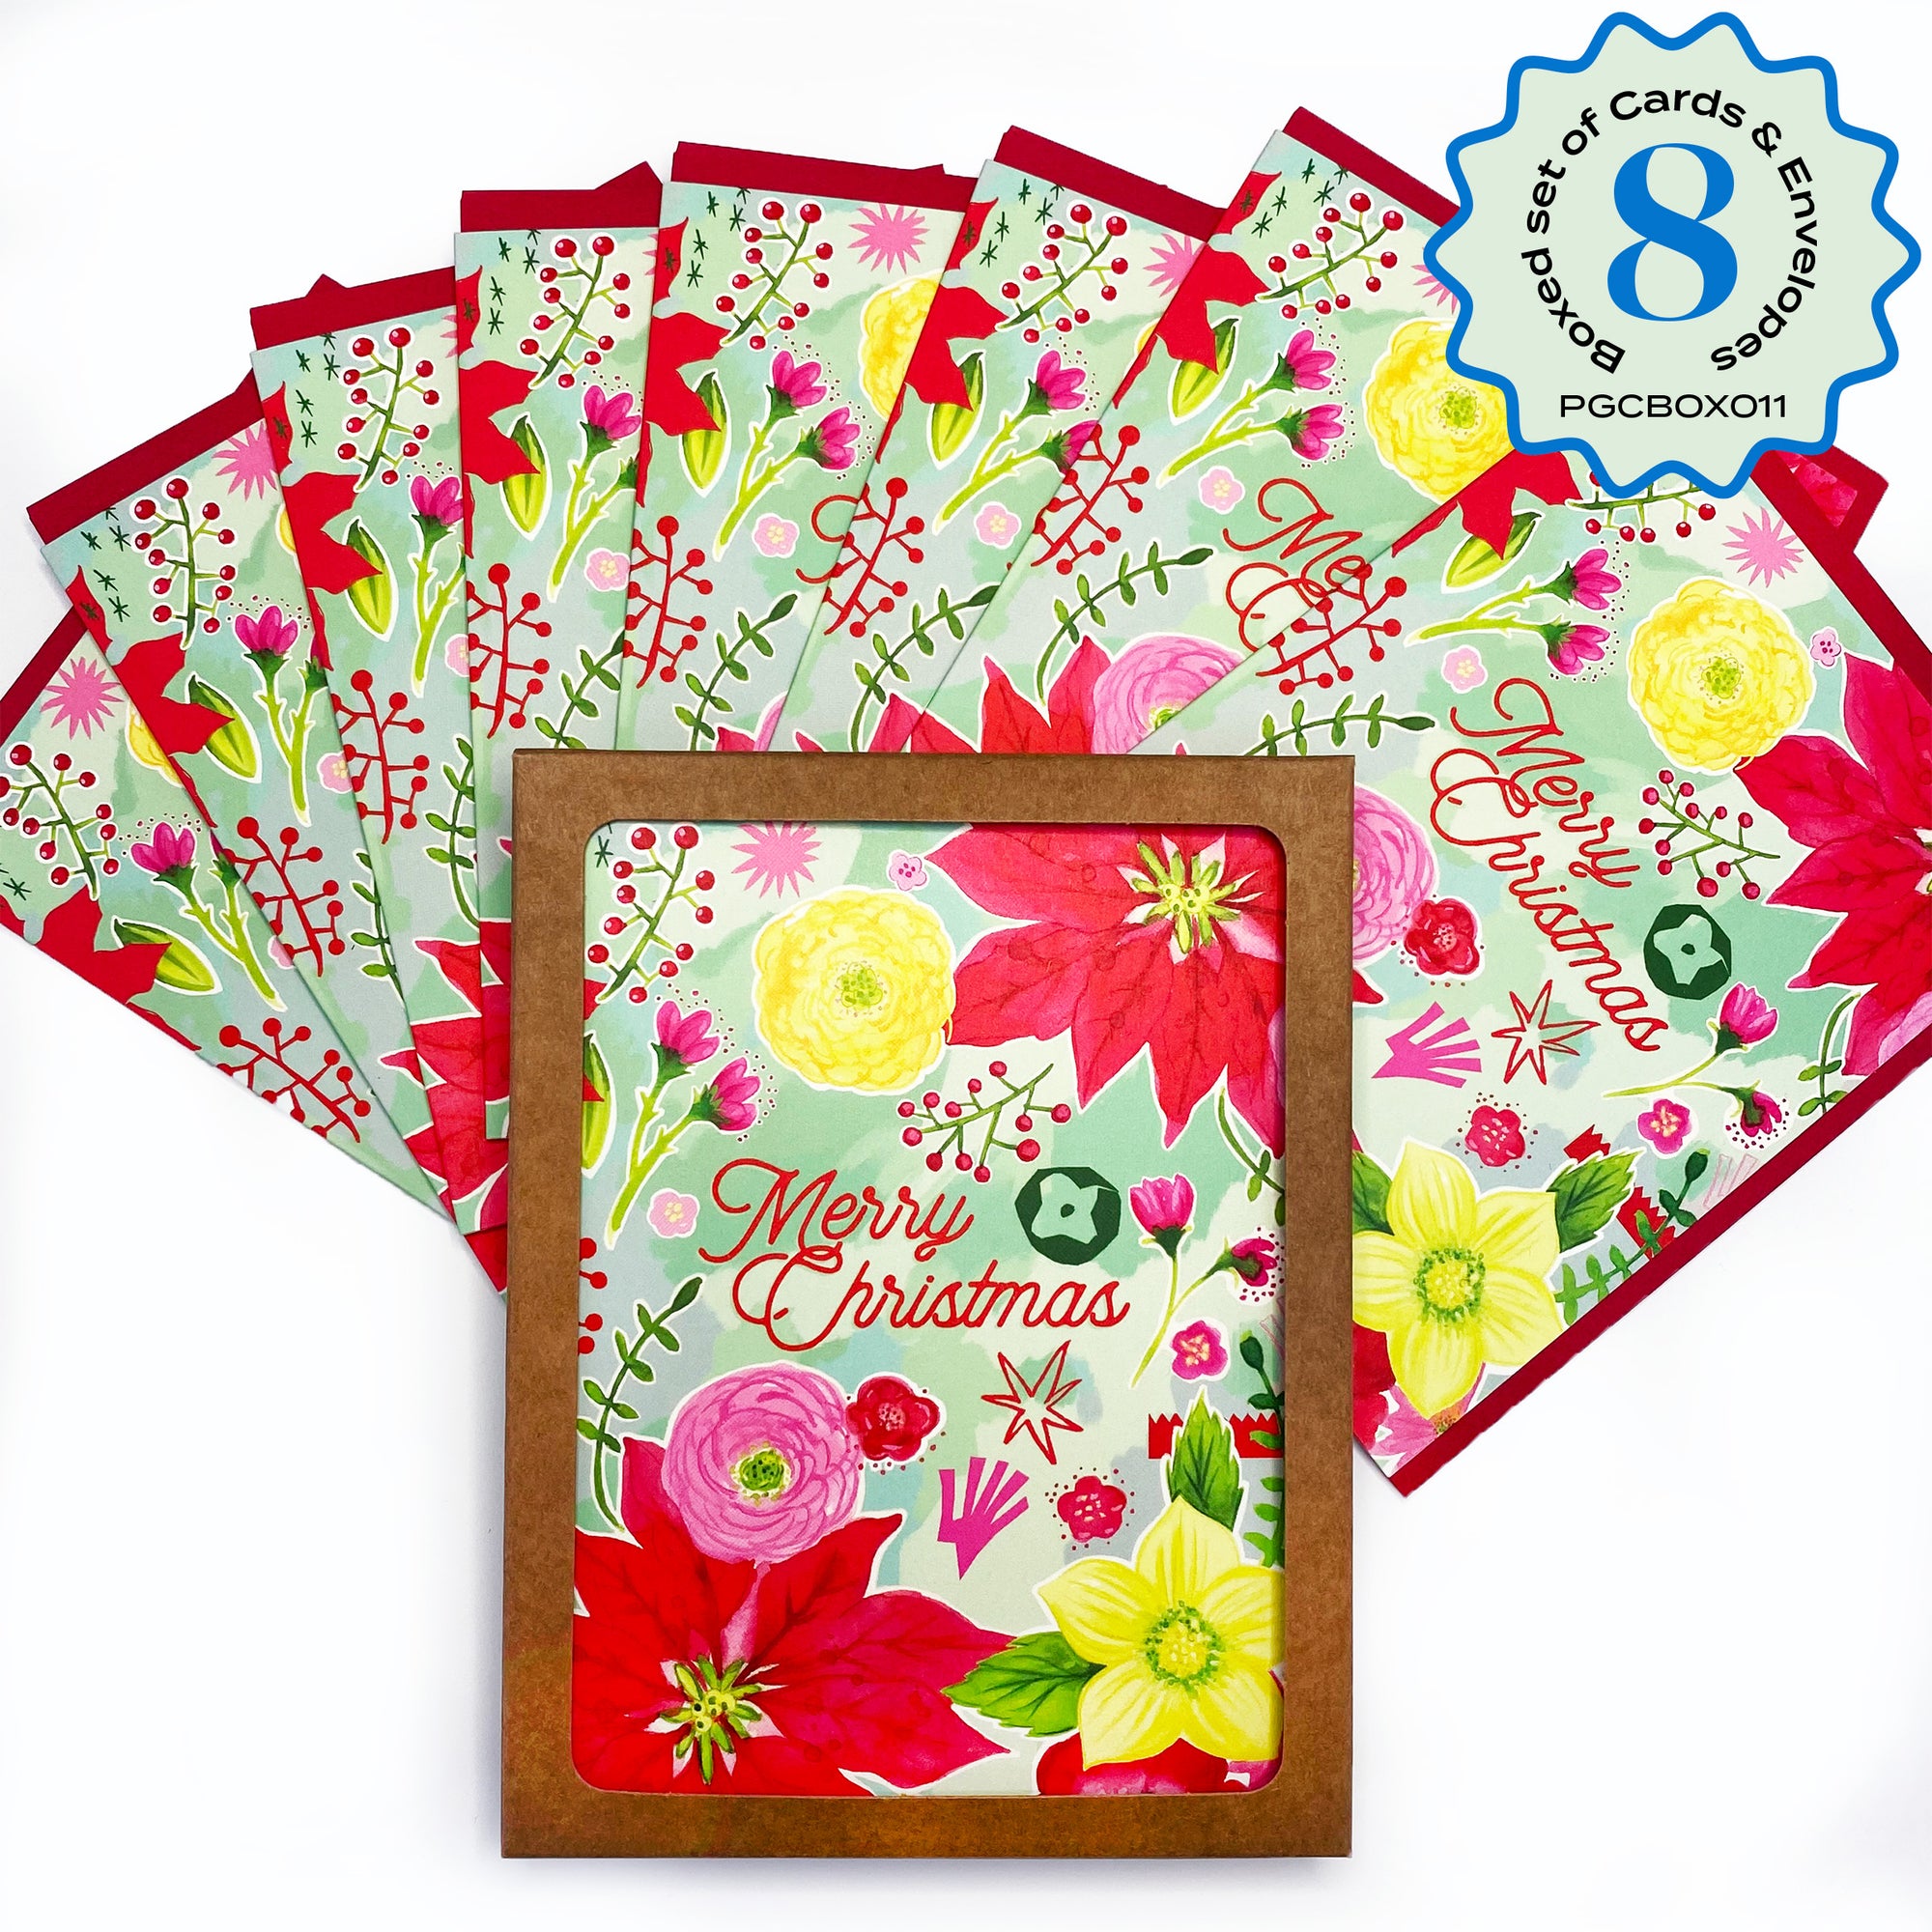 Merry Christmas floral card set of 8. Packaged in a Kraft box with a window on front so you can see the card. Mint green background, red pointsettias, yellow roses, pink ranunculus. 